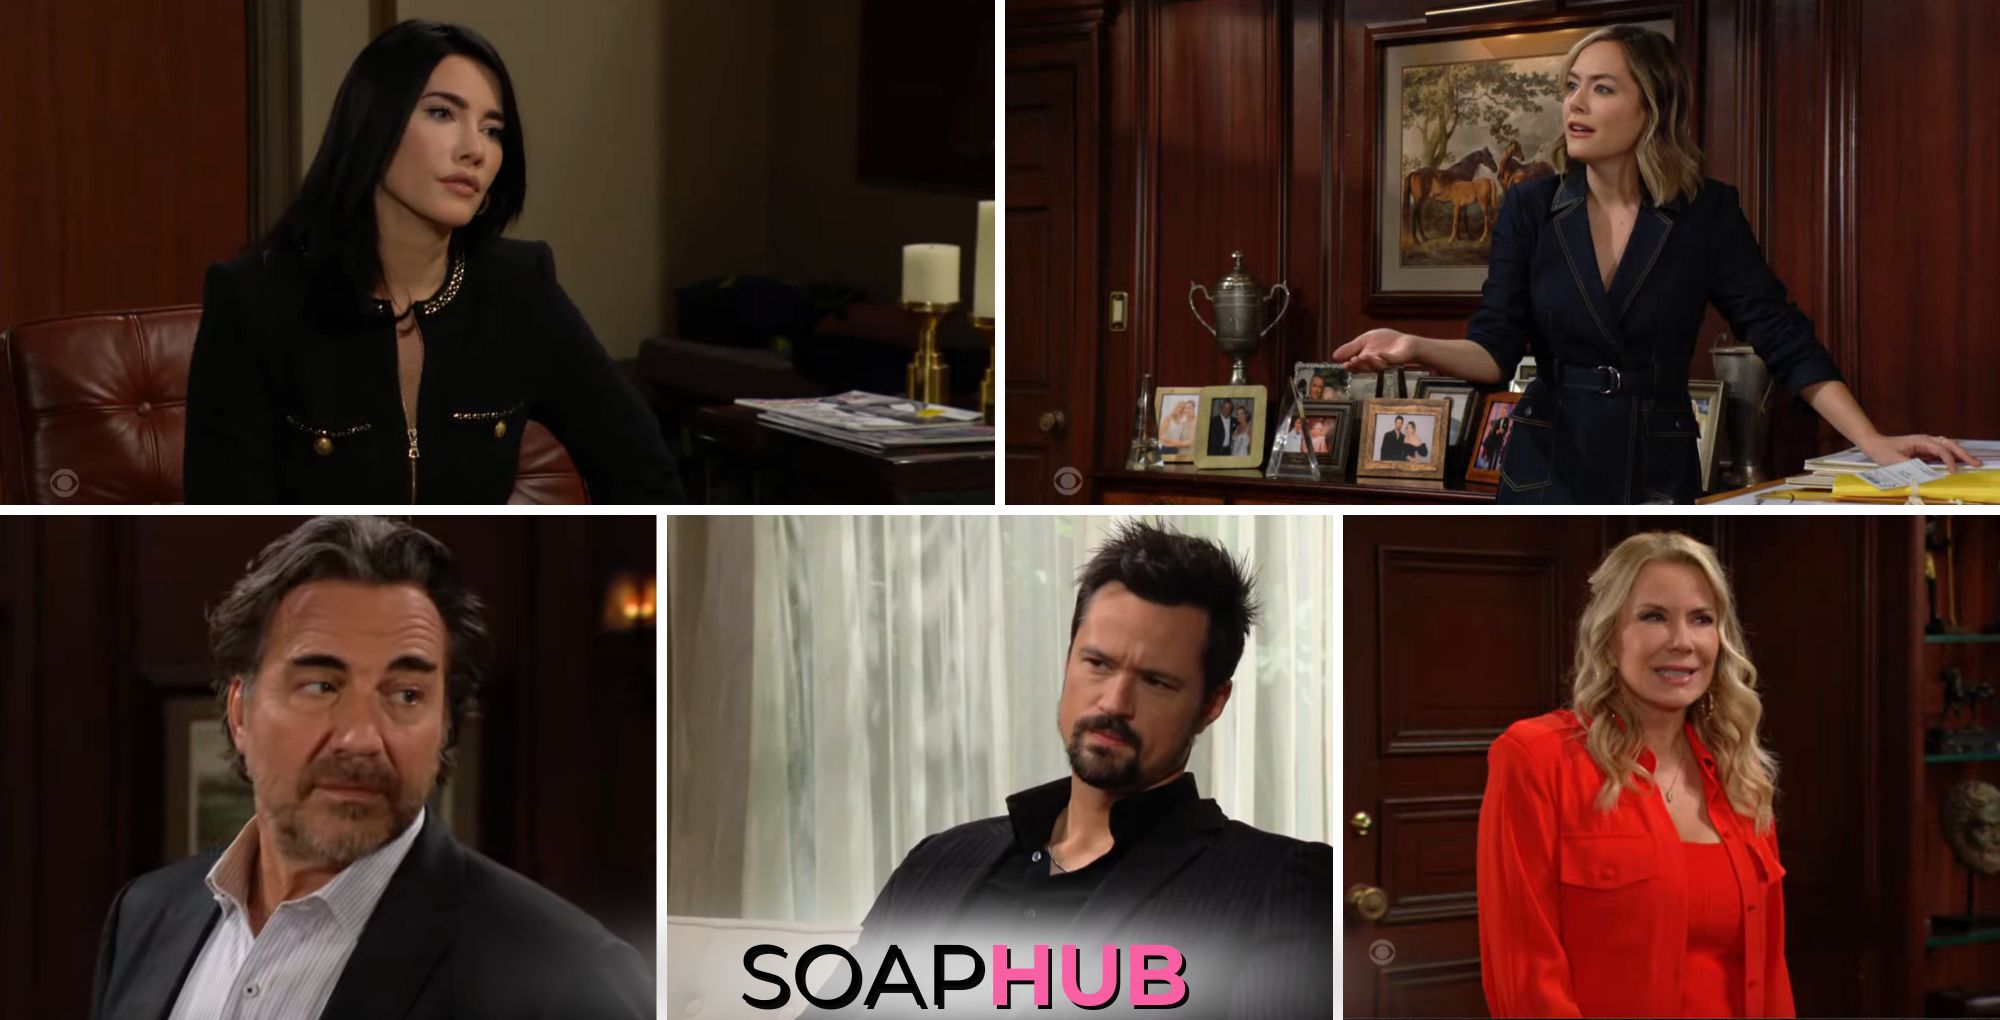 The Bold and the Beautiful newsy recap for March 26 features Steffy, Hope, Thomas, Brooke, and Ridge with the Soap Hub logo across the bottom.